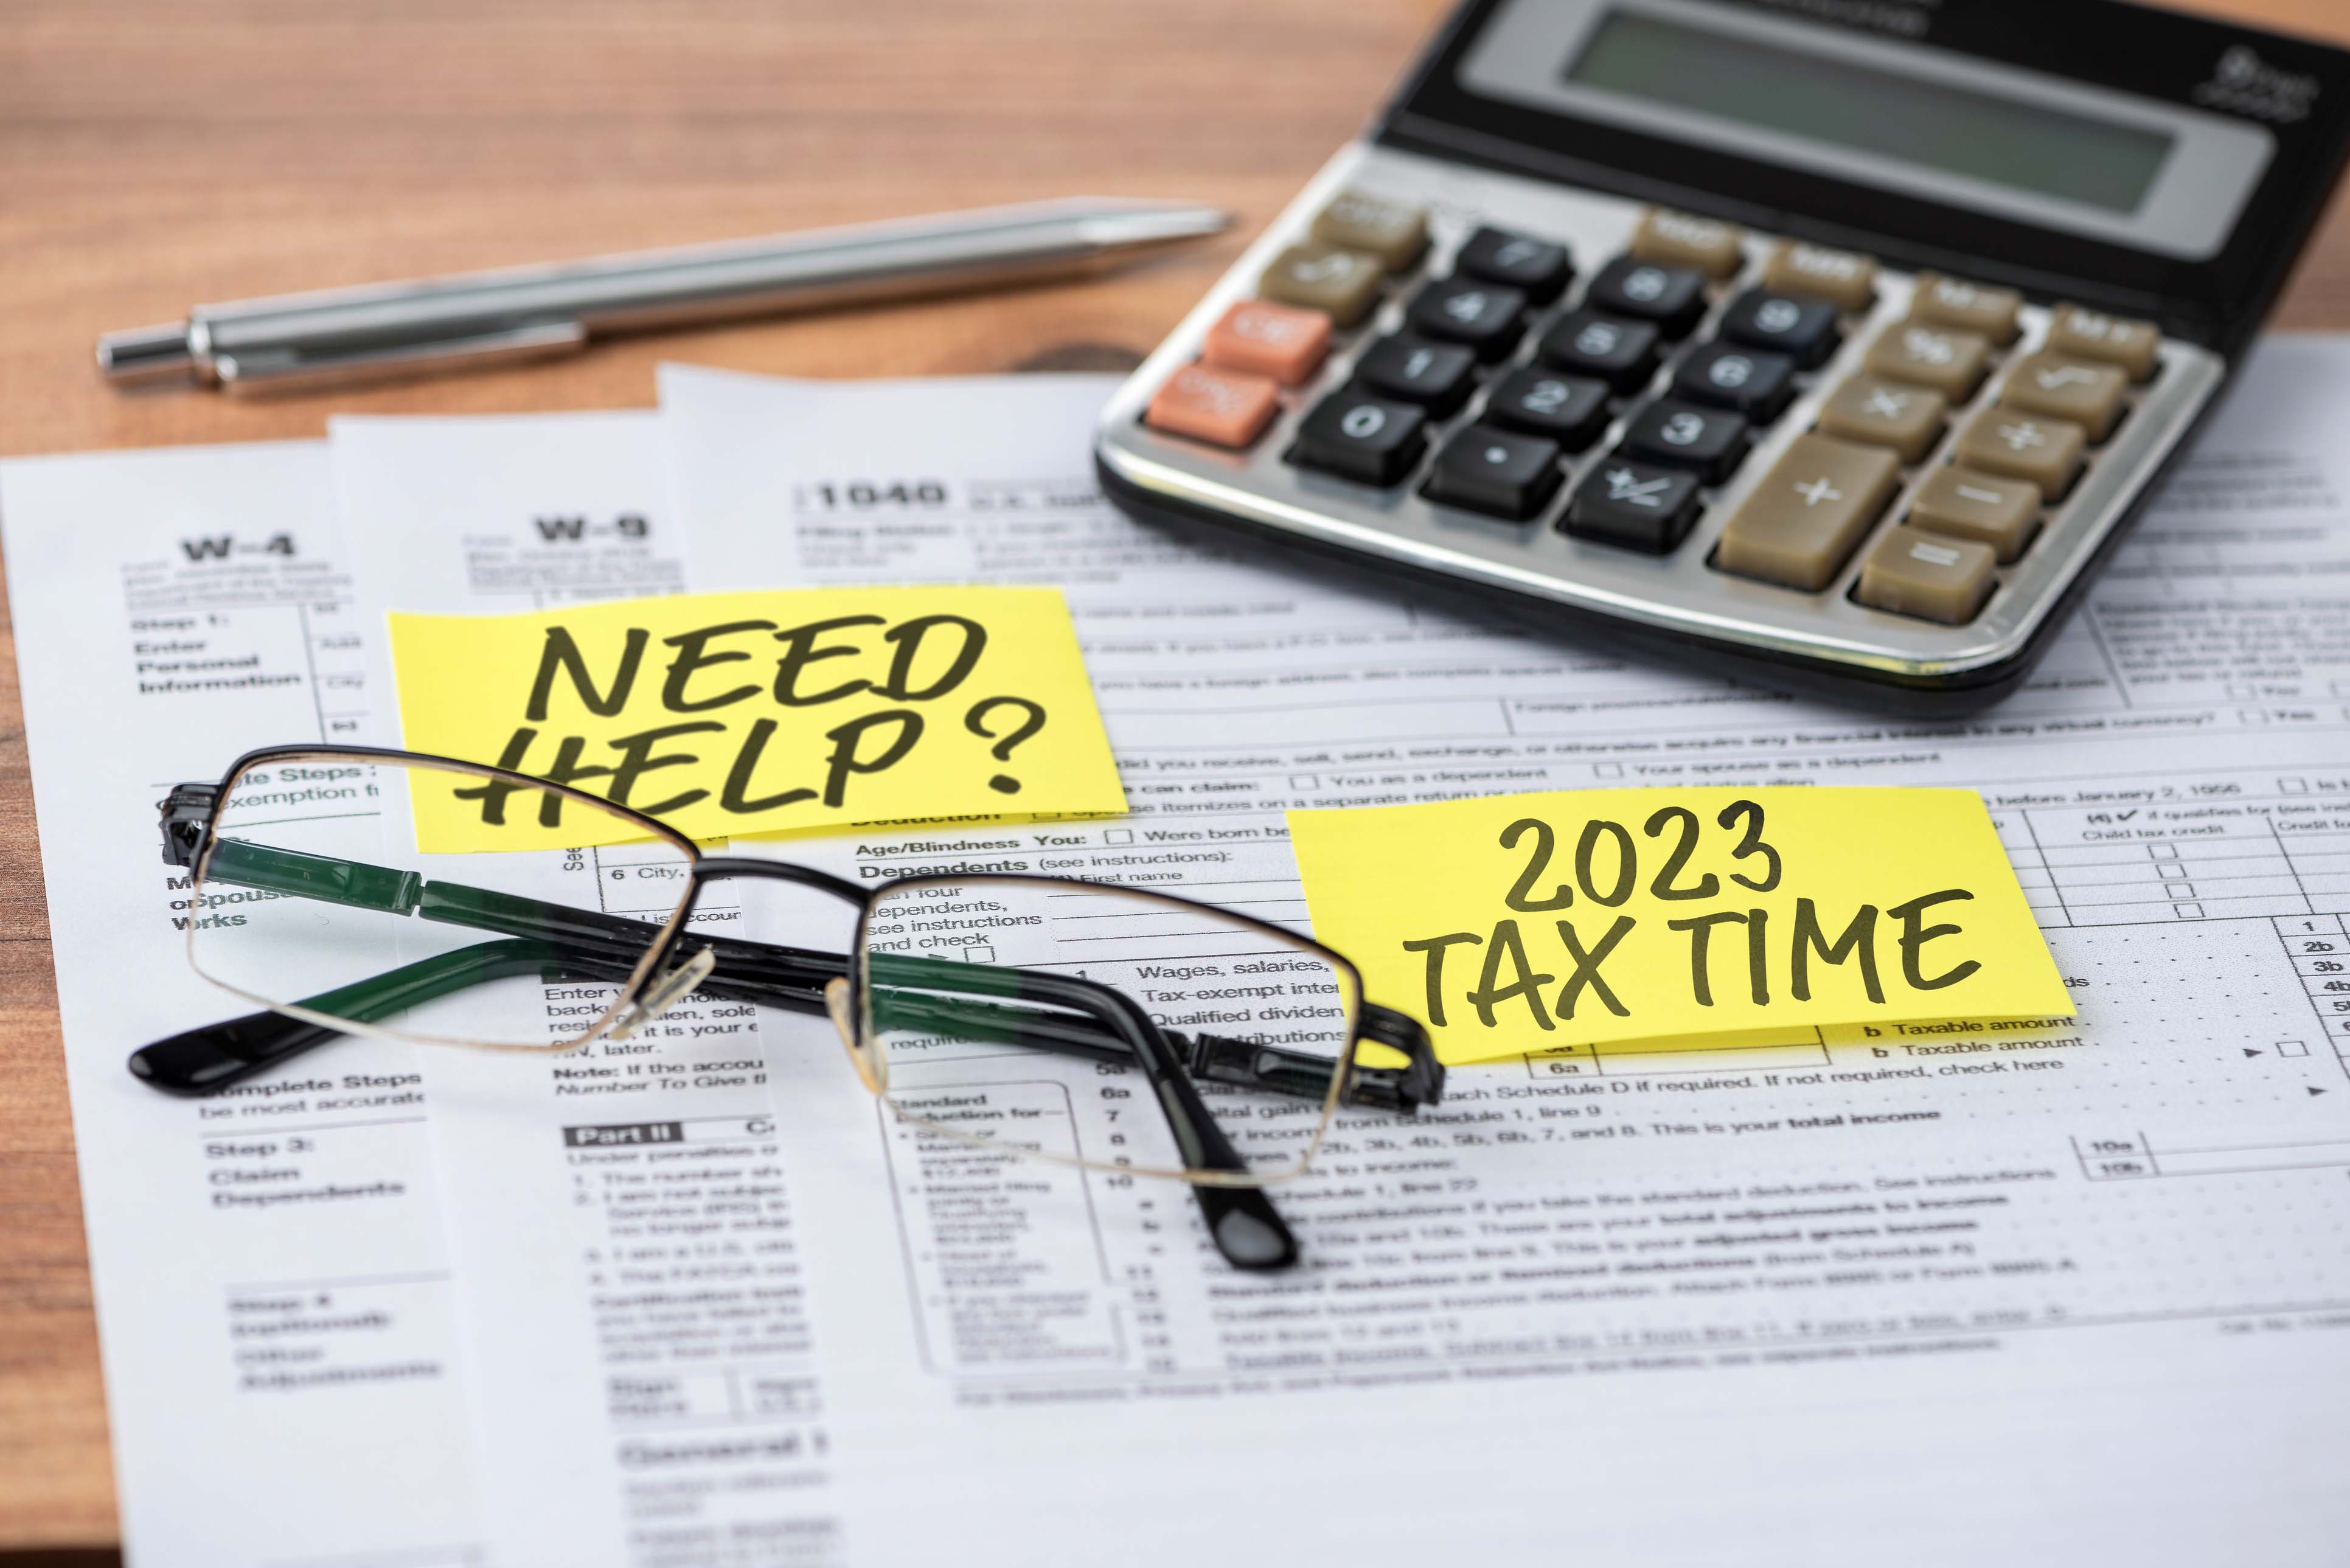 2020 TAX TIME and NEED HELP note on tax forms. Tax concept